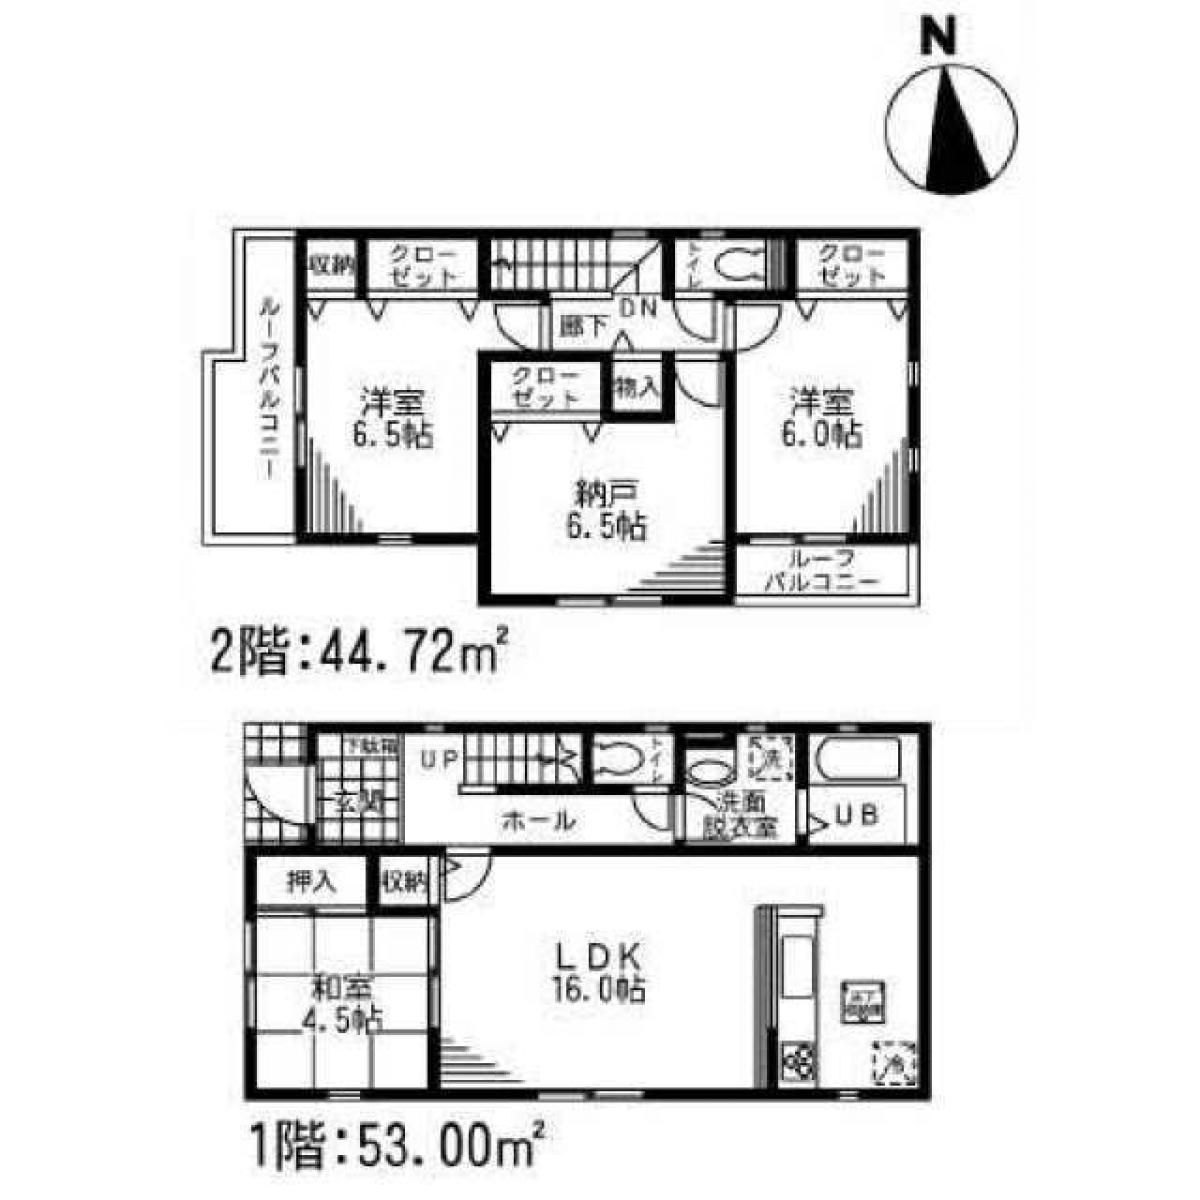 Picture of Home For Sale in Neyagawa Shi, Osaka, Japan